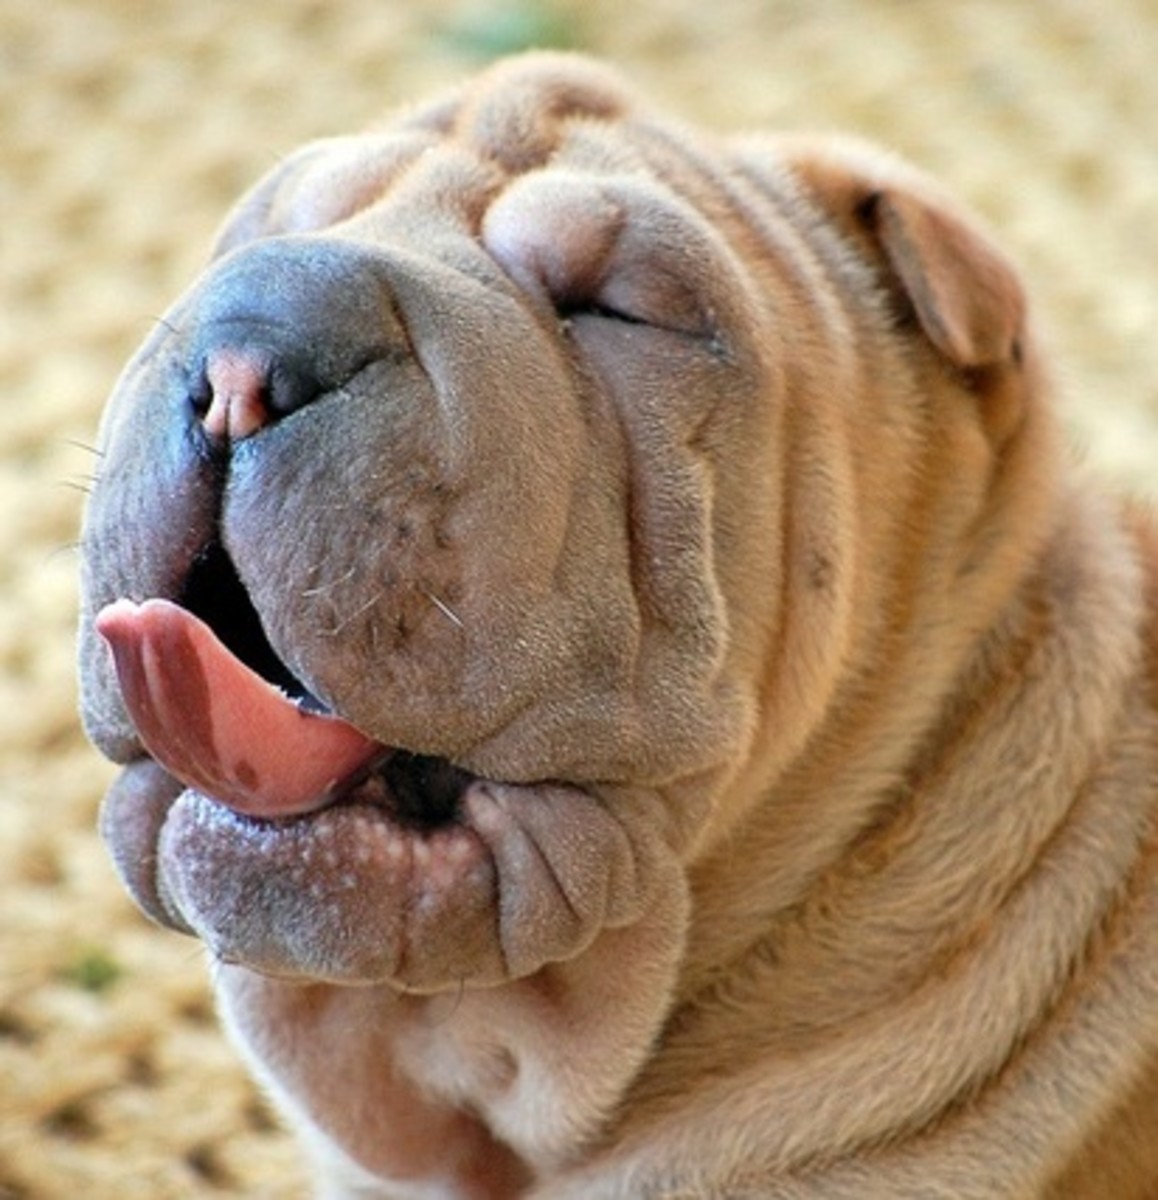 Dogs like the Shar-Pei may have entropion. When eyelashes rub against the cornea, it can cause a red, irritated eye.